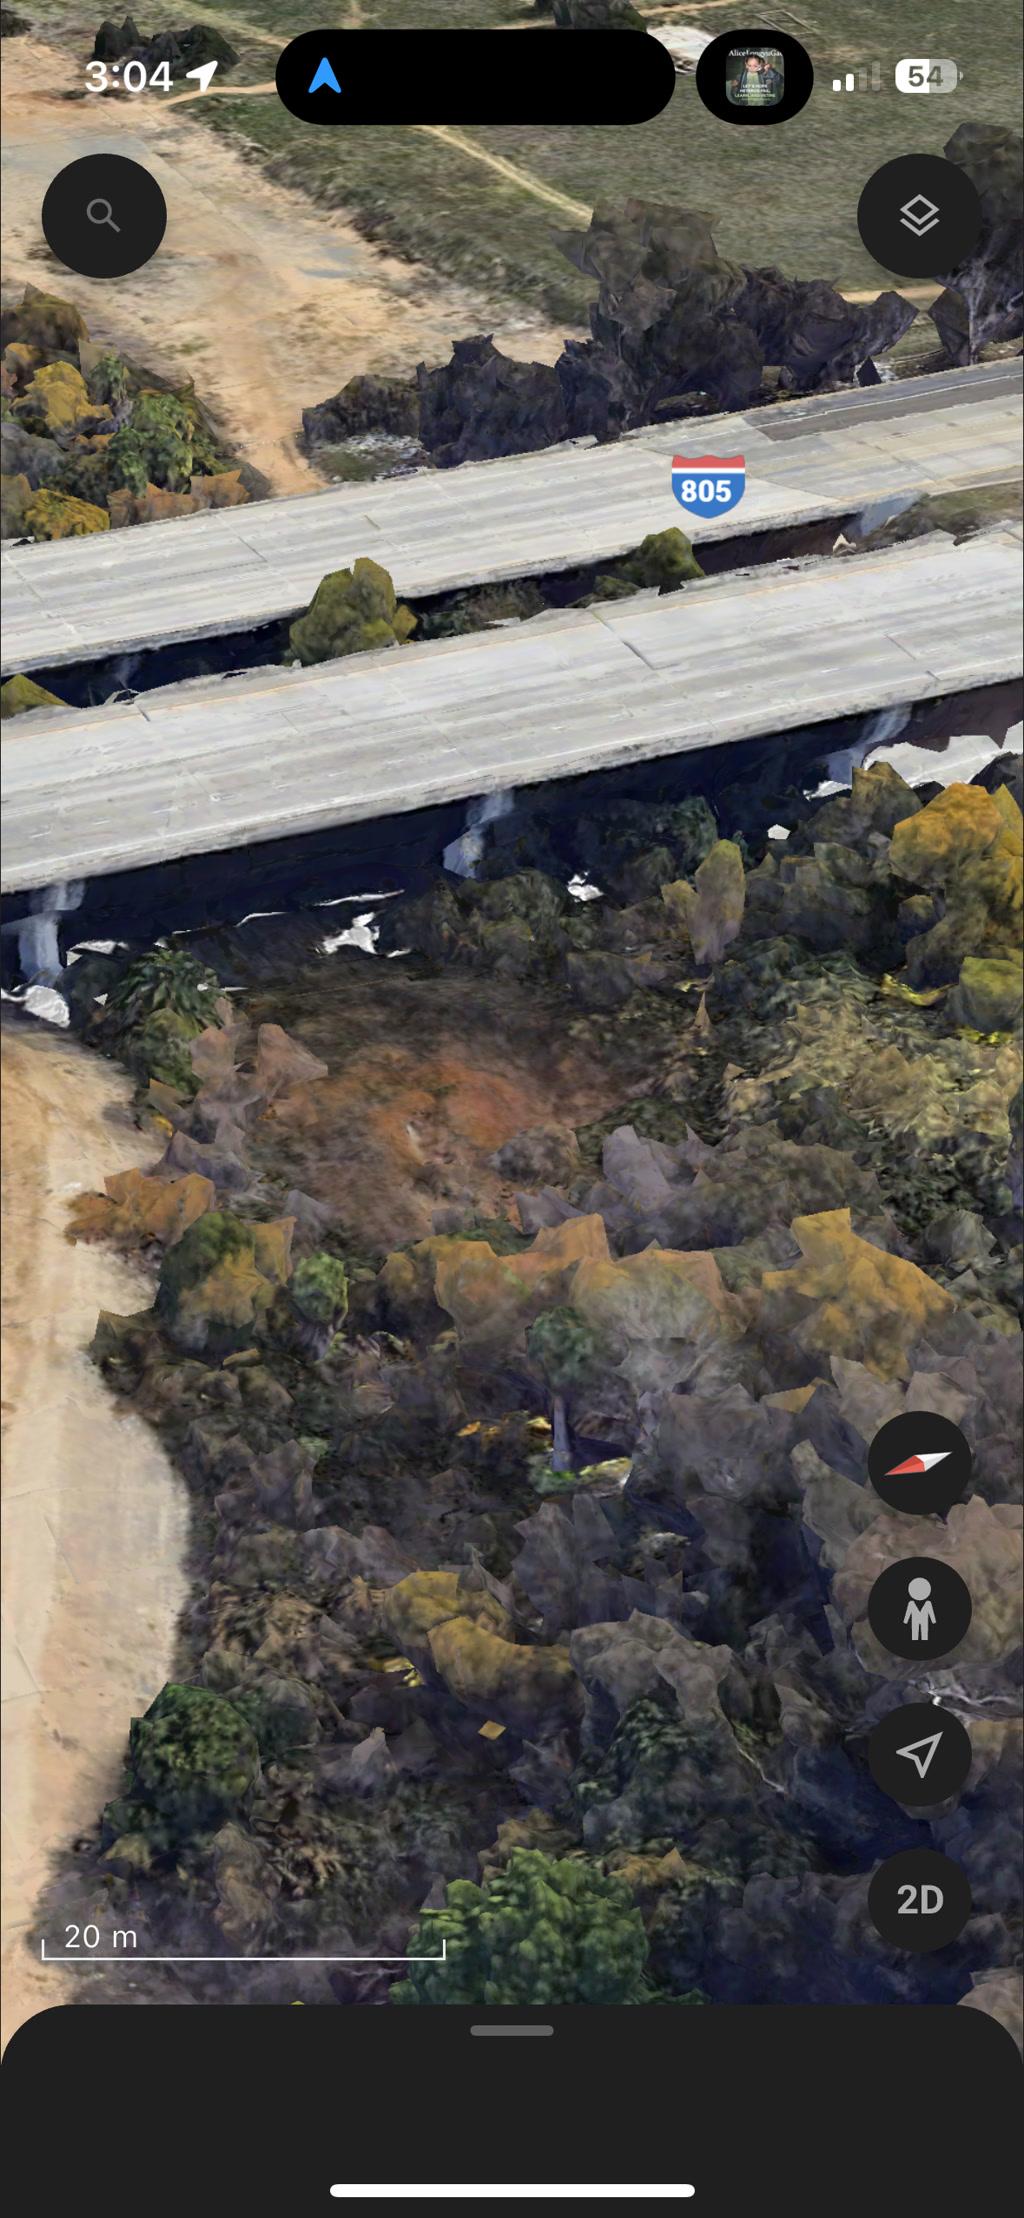 The view shows a three-dimensional, satellite perspective of a landscape where a freeway overpass, labeled '805', crosses above another road or area. The terrain looks rugged with patches of greenery and possibly some rocky formations. The image seems to have areas affected by digital rendering artifacts, giving some parts of the terrain a distorted appearance. User interface elements from a mapping application are visible, including search and location buttons, a scale indicator showing '20 m', and other navigation icons. The user interface also includes indications of the time '3:04', a navigation arrow, and some obscured elements at the top of the screen.